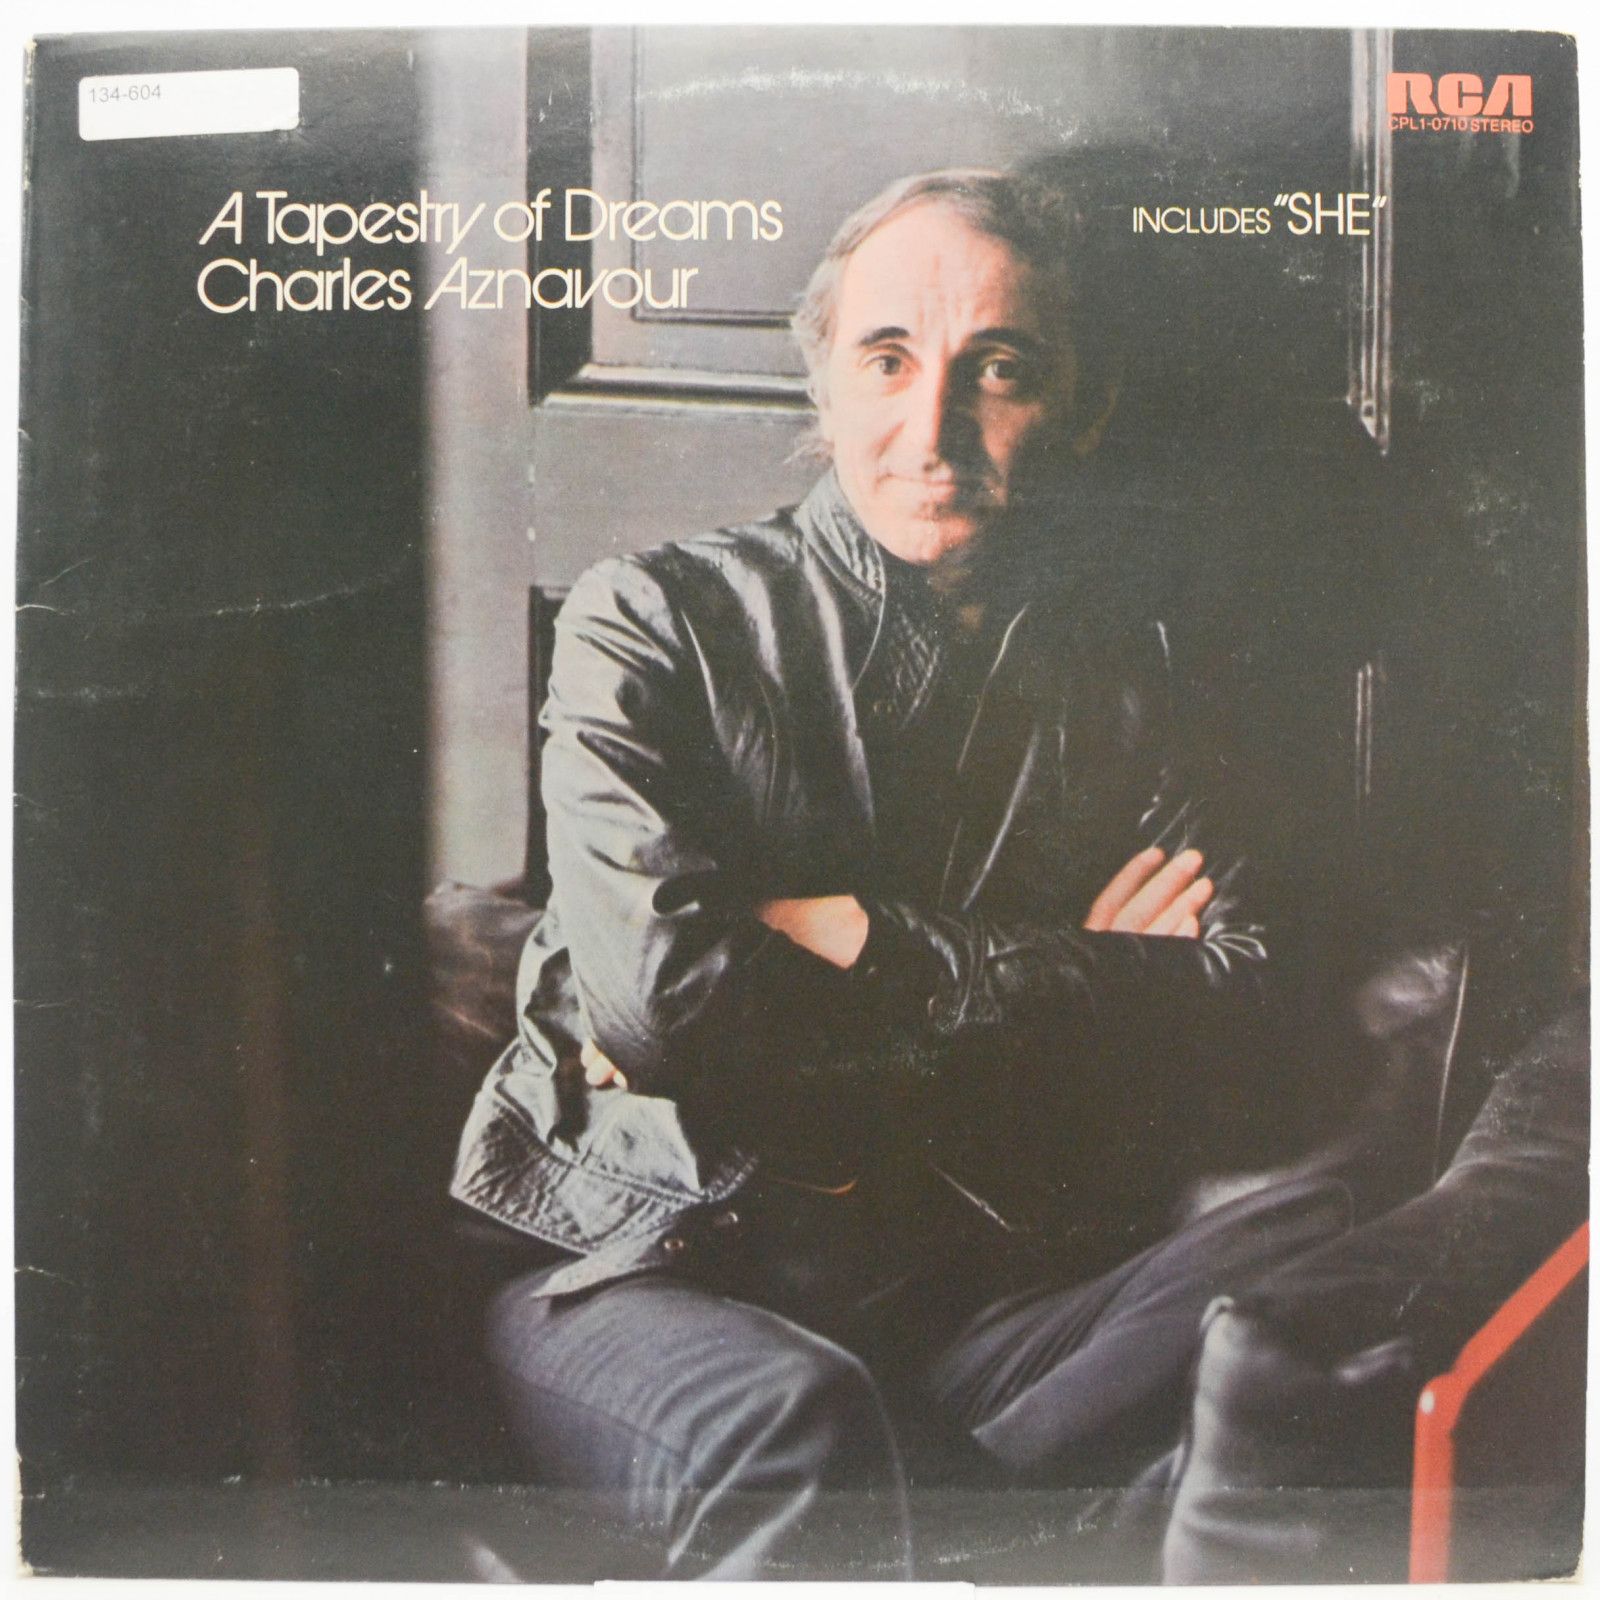 Charles Aznavour — A Tapestry Of Dreams (USA), 1974